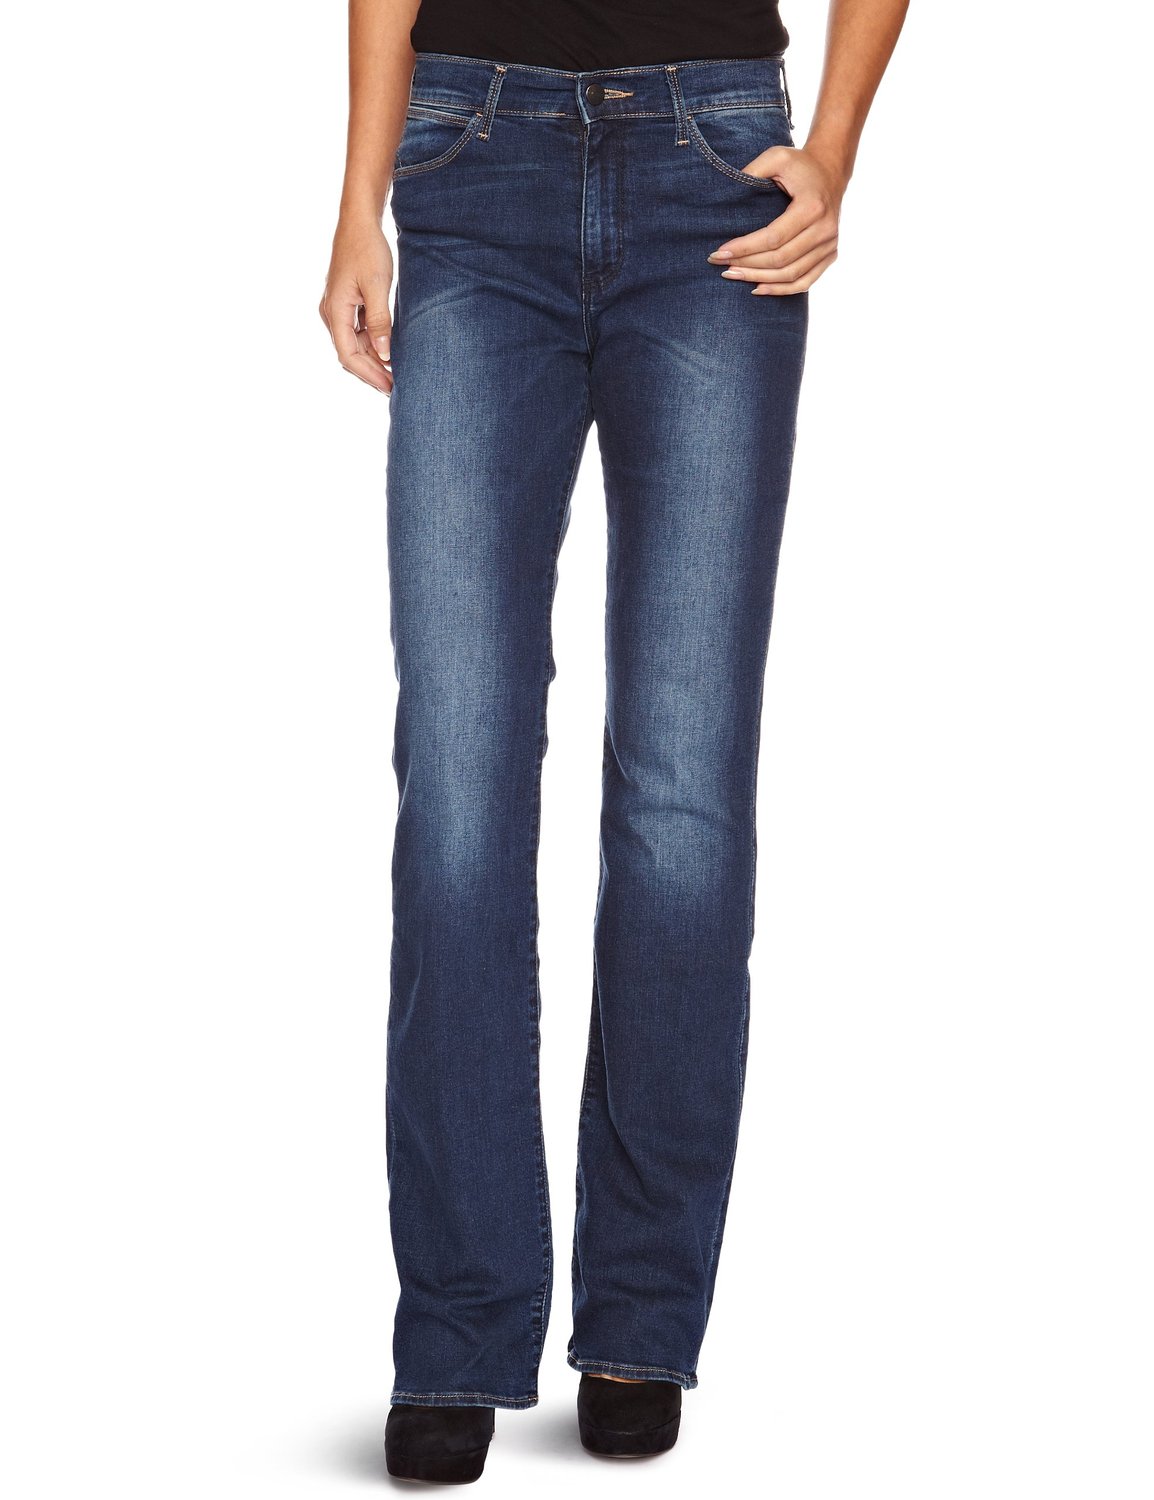 Wrangler Tina Boocut Stretch Jeans New Womens Ladies Blue Scuffed ...